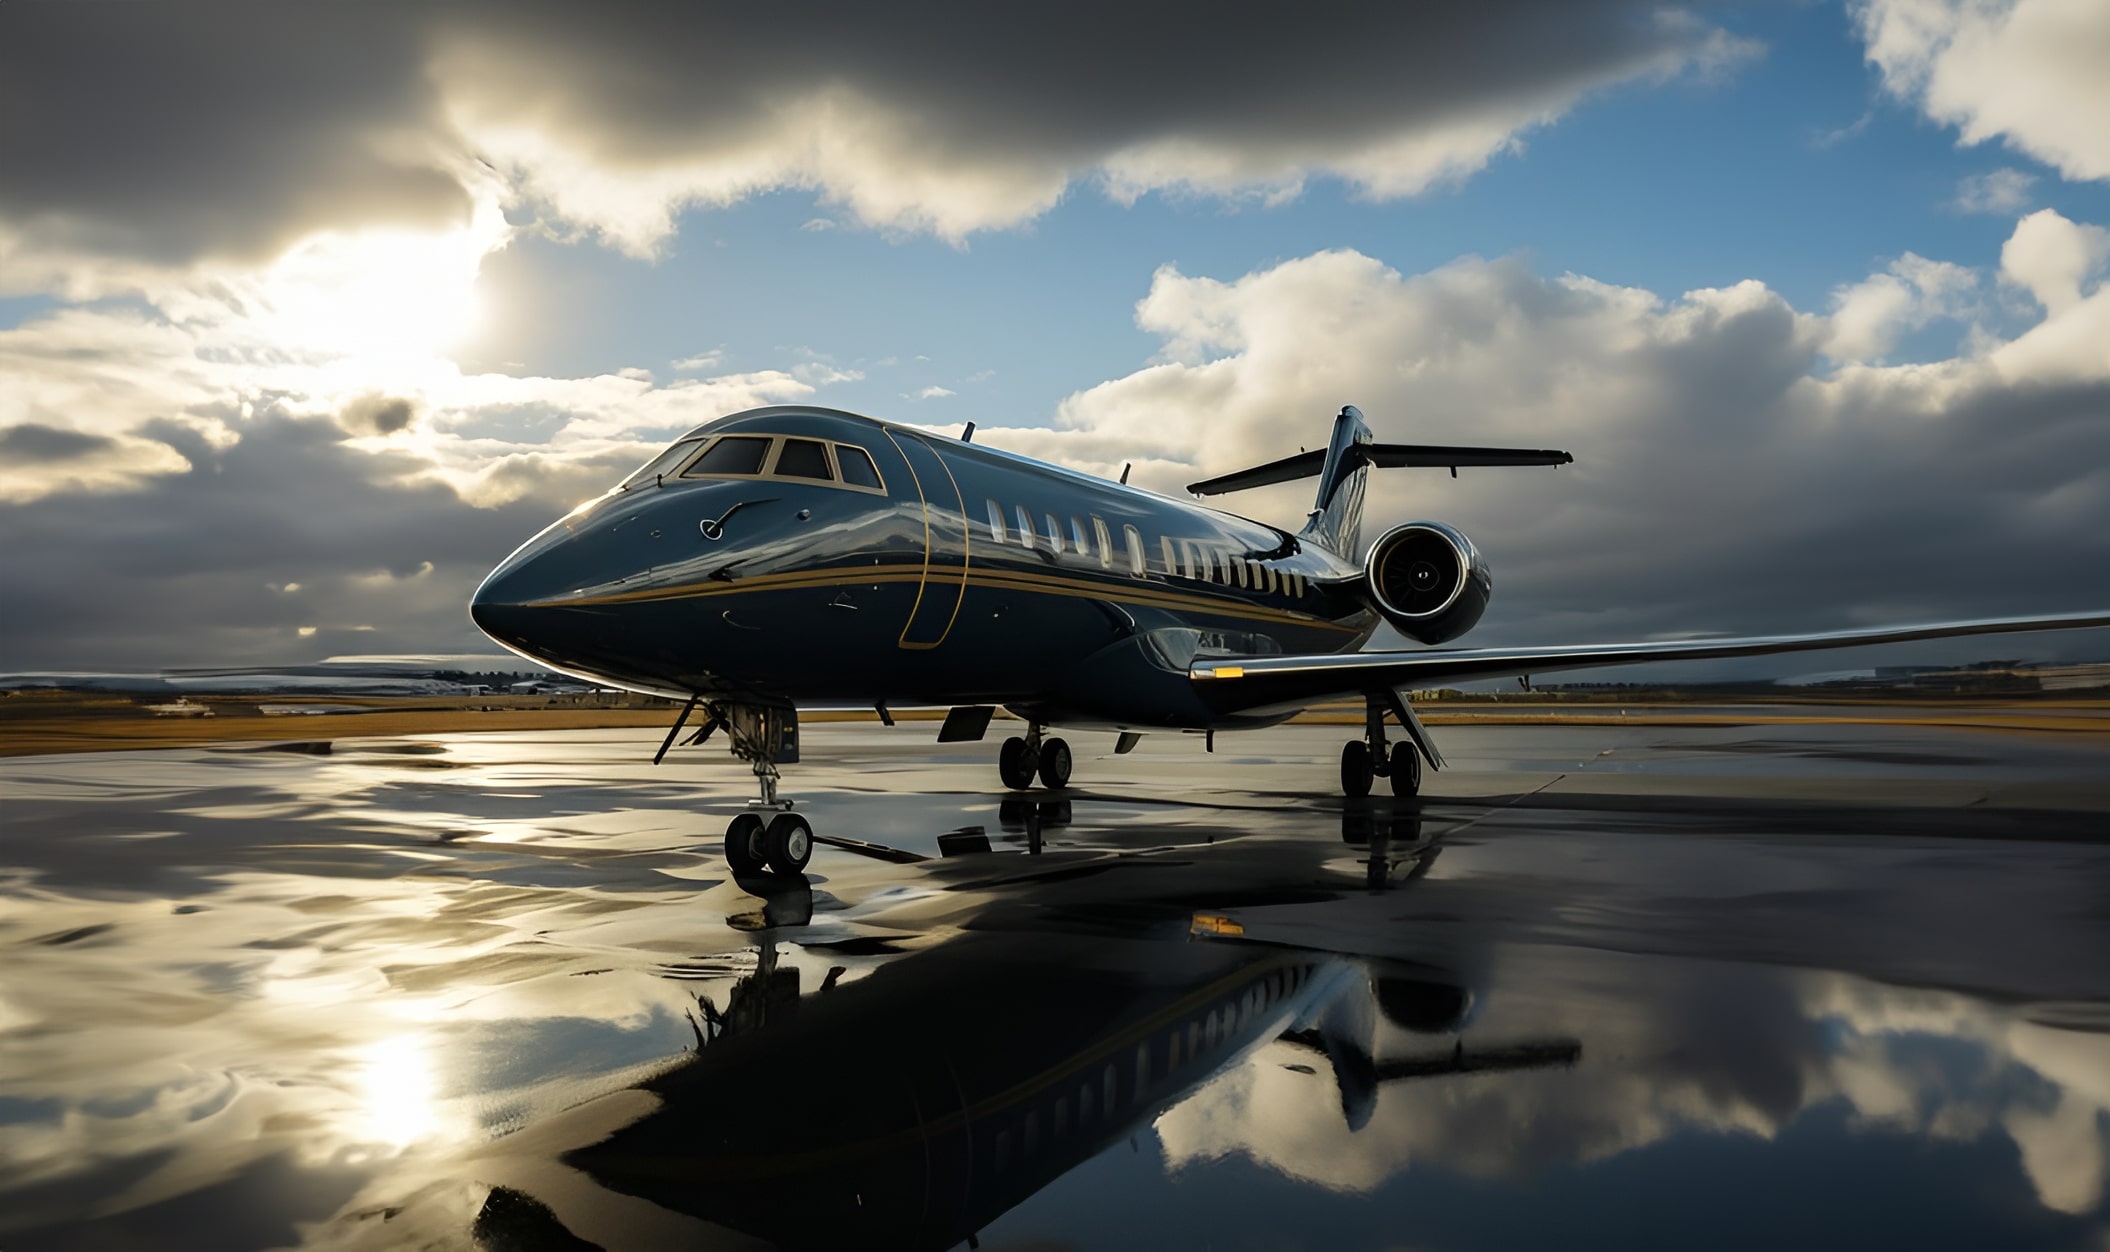 Your Private Jet Awaits, Ready for Your Dream Journey?